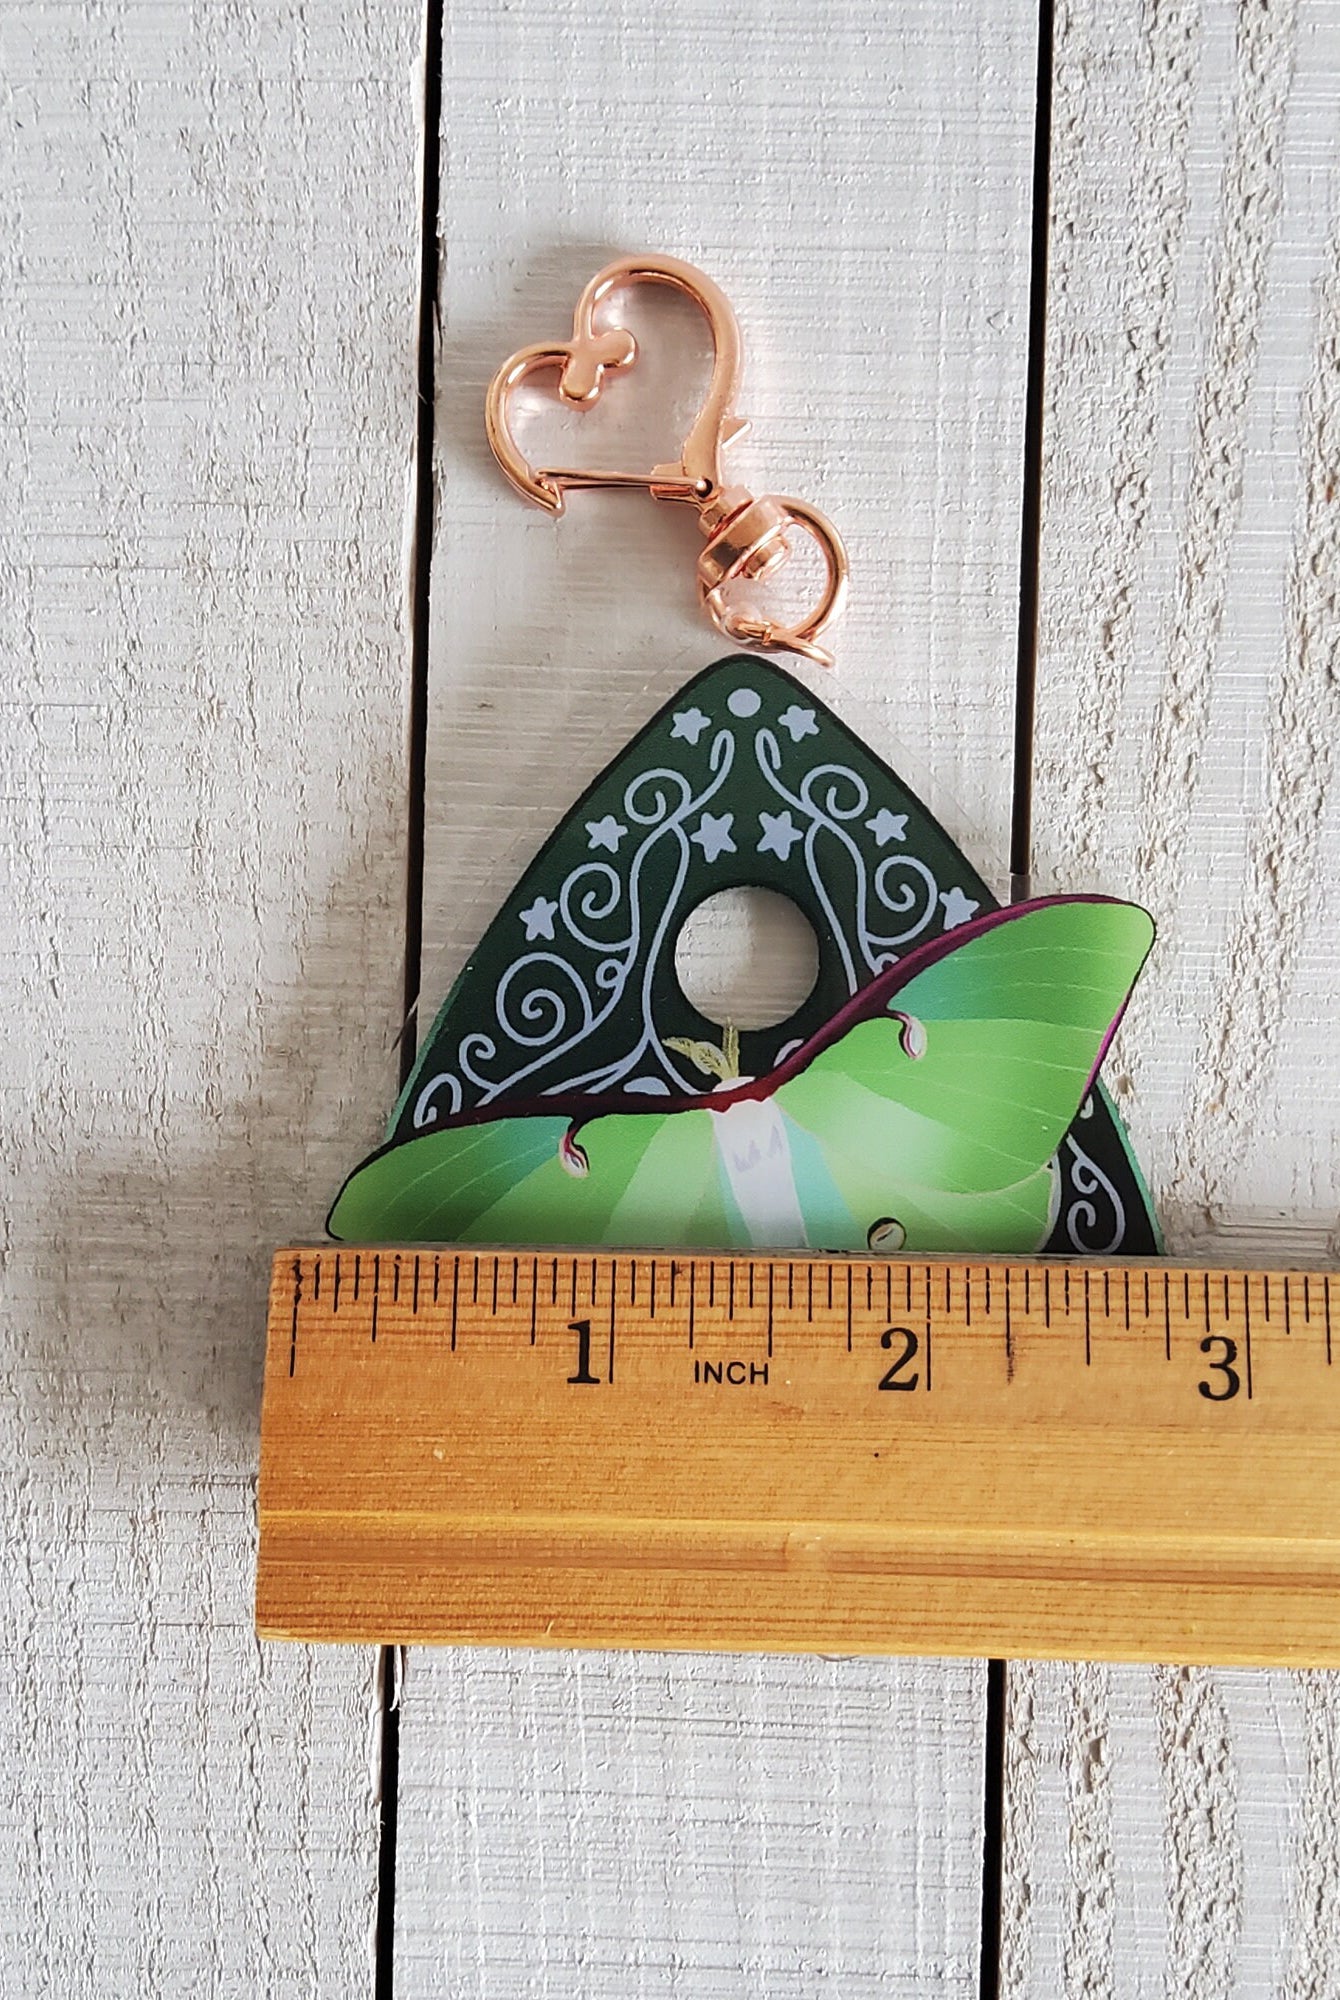 ACRYLIC CHARM Double Sided: Green Luna Moth and Planchette , Luna Moth and Planchette Charm , Moth and Planchette Acrylic Charm